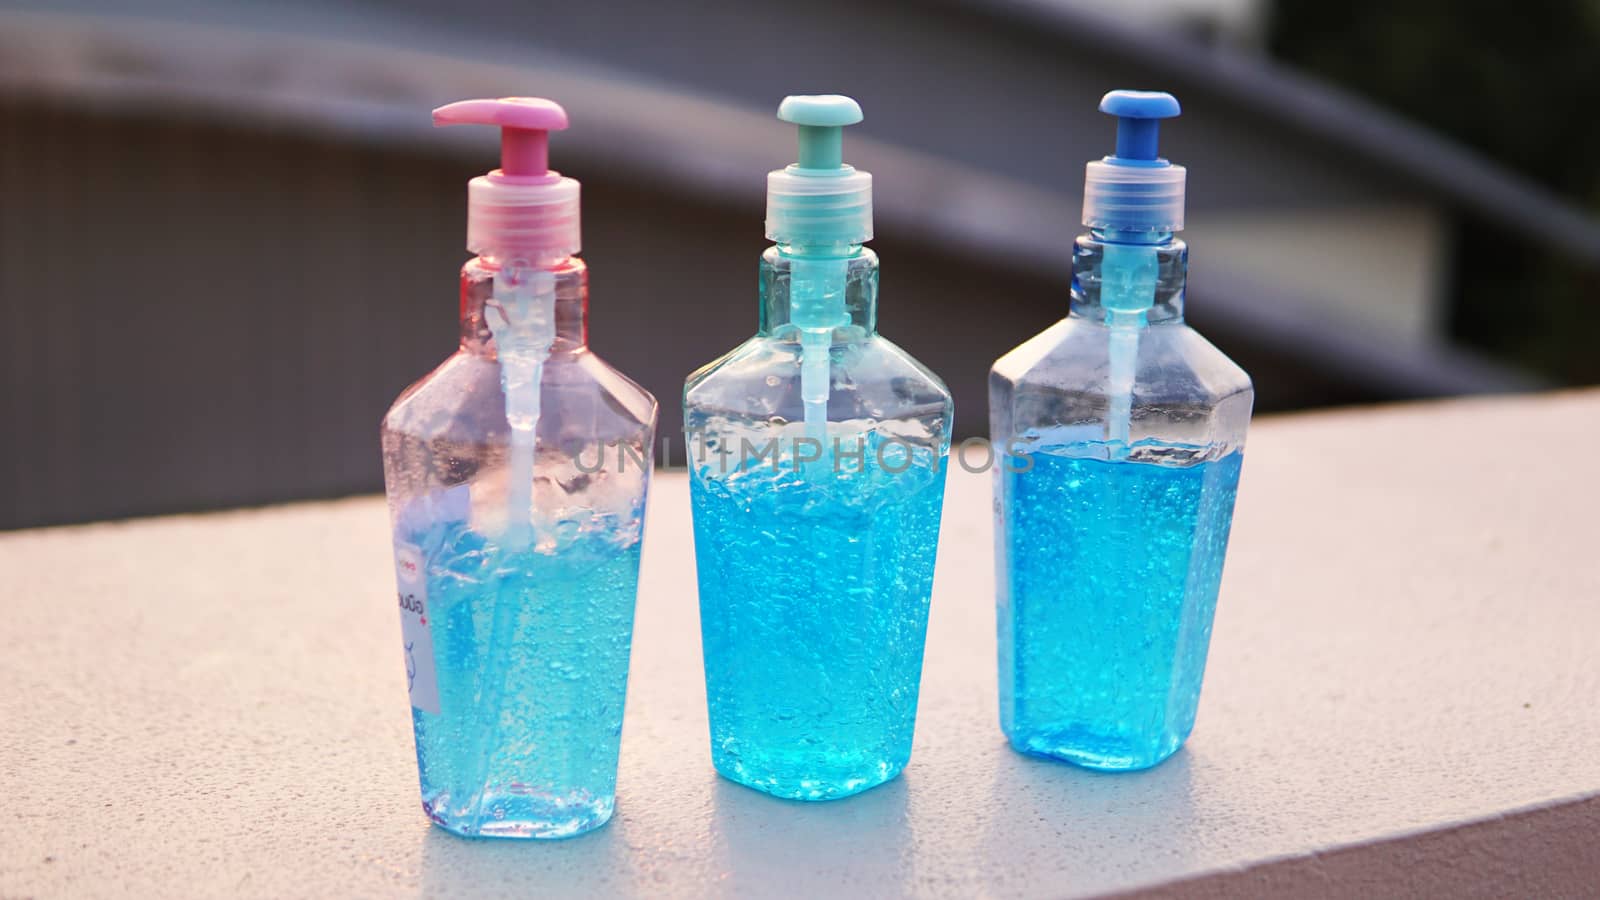 Dispenser bottles of alcohol based gel hand sanitizers to keep hands from germs and bacteria during the Covid-19 or Coronavirus pandemic.